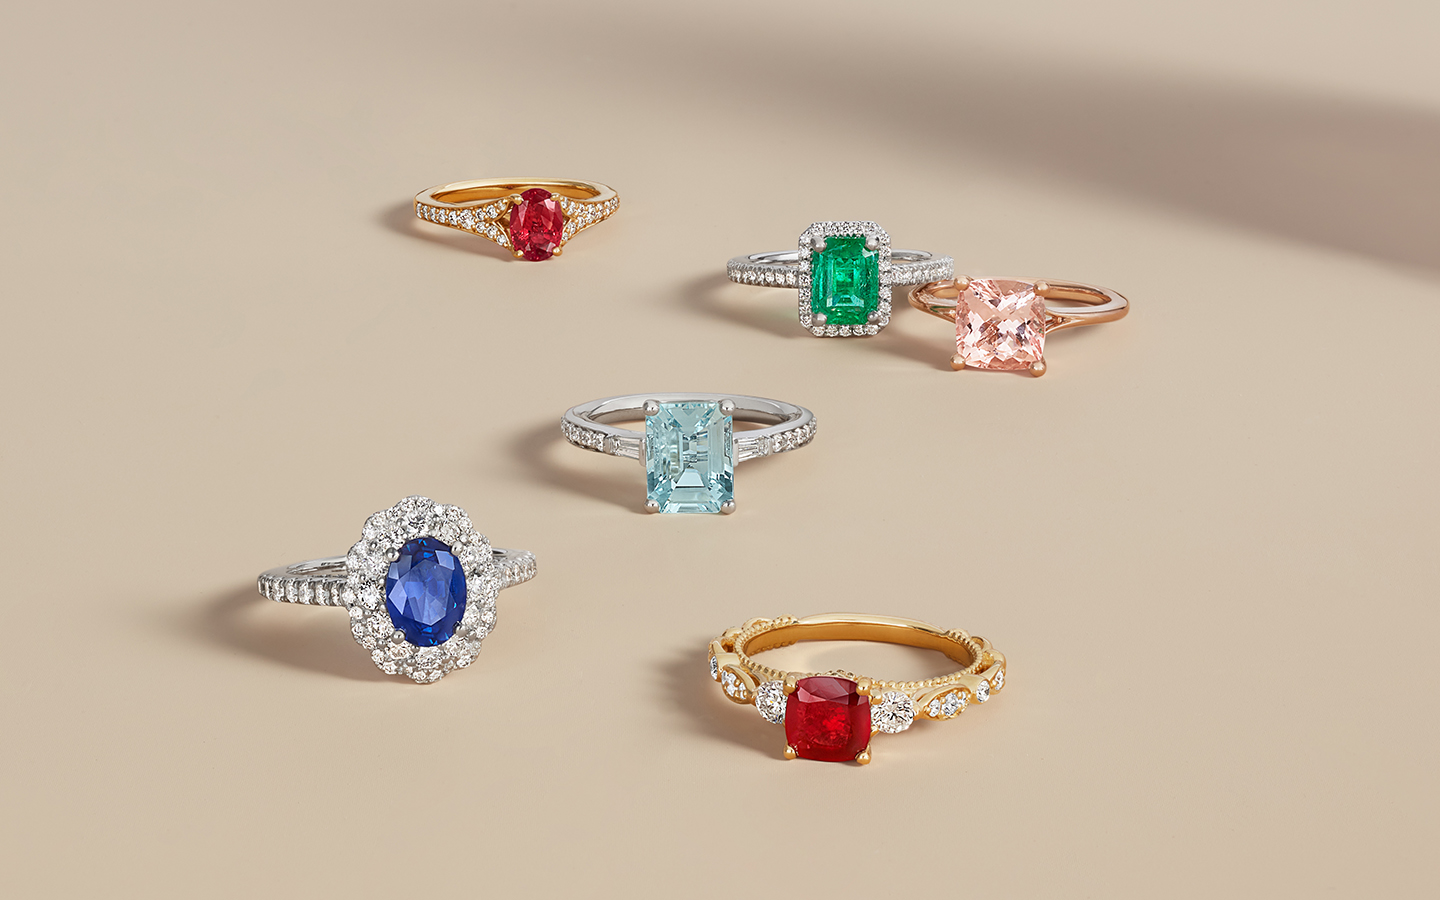 Six gemstone unique engagement rings with ruby, sapphire and emerald.